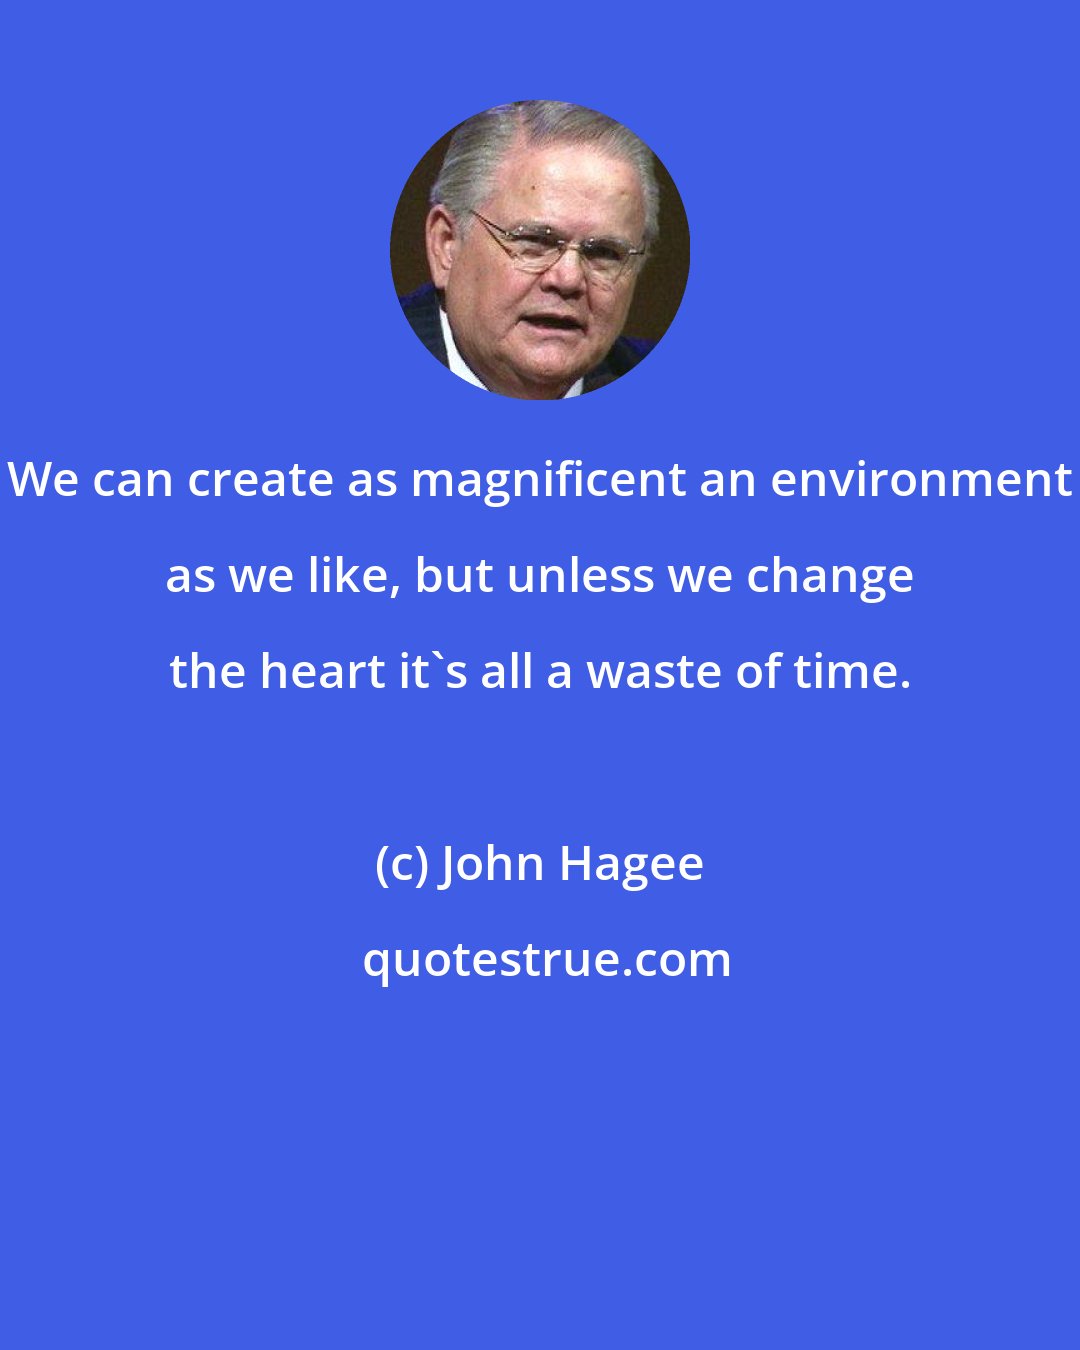 John Hagee: We can create as magnificent an environment as we like, but unless we change the heart it's all a waste of time.